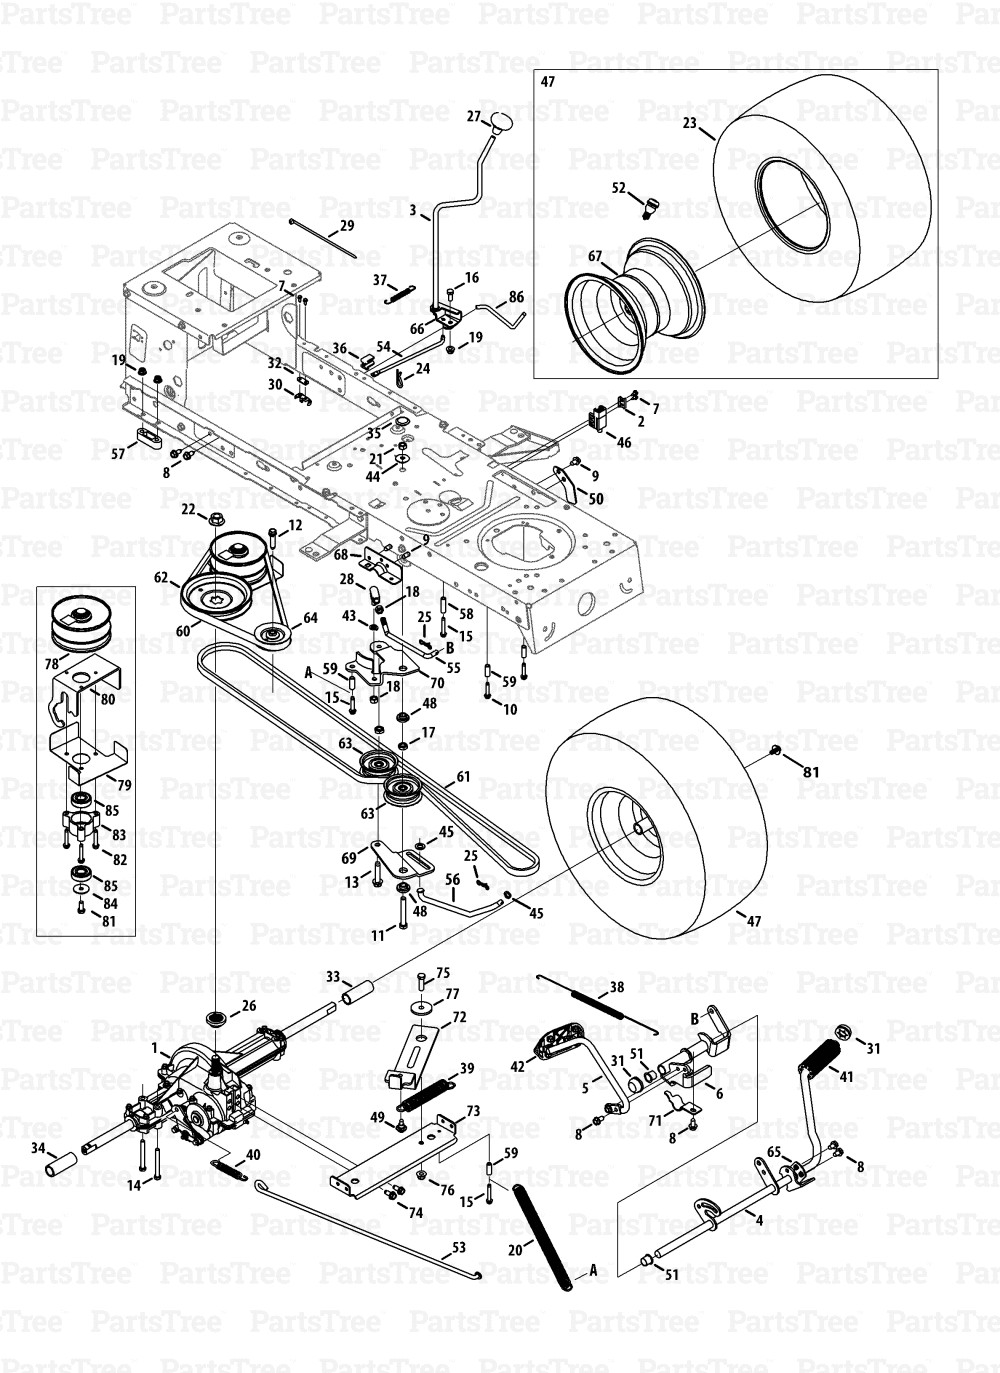 MTD 247 13BL78ST099 Craftsman LT2000 Lawn Tractor 2013 Sears Transmission Drive Assembly Diagram and Parts List